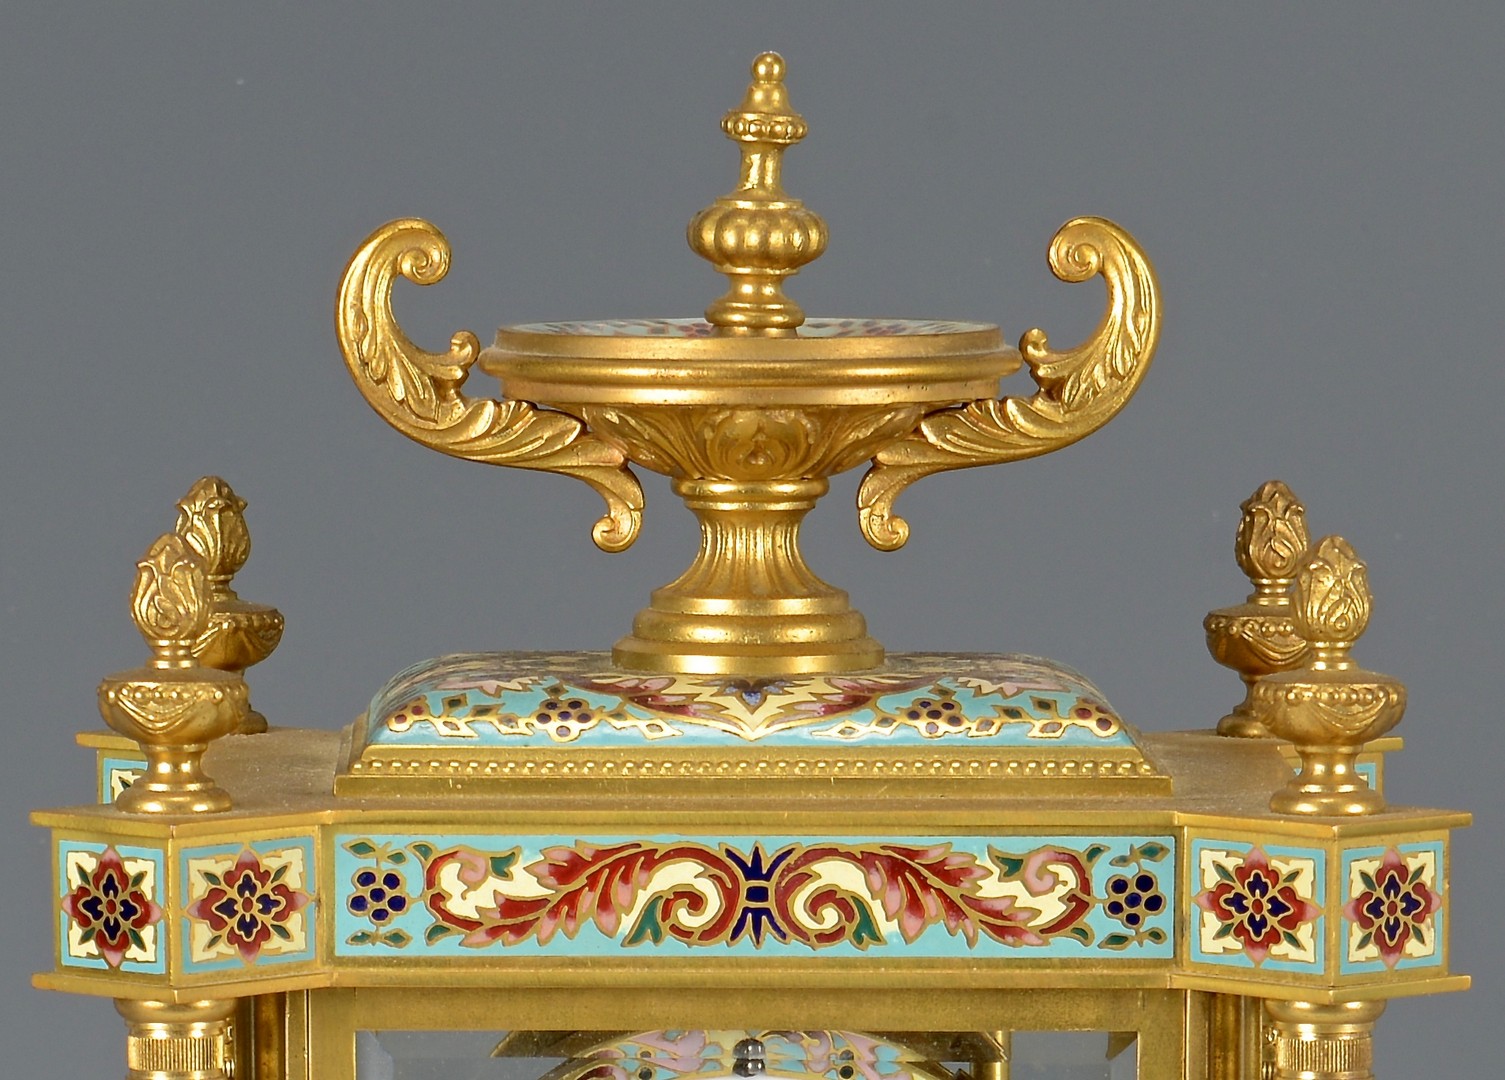 Lot 260: French Gilt and Enameled Clock